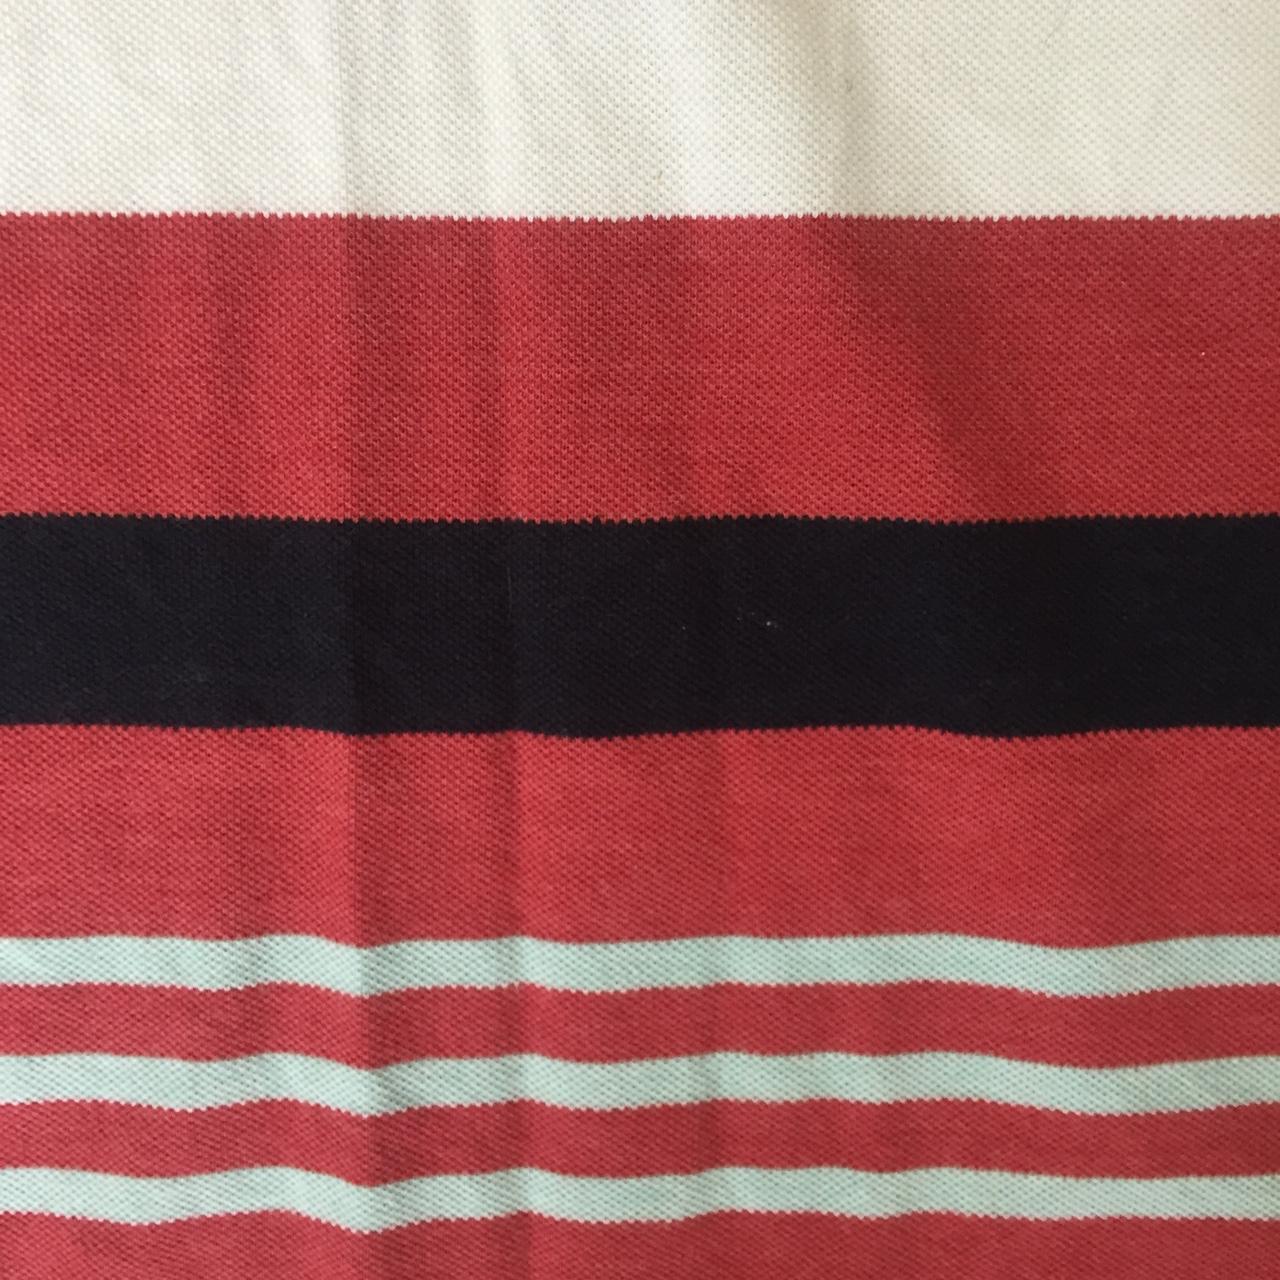 Product Image 4 - Rivers red white and black